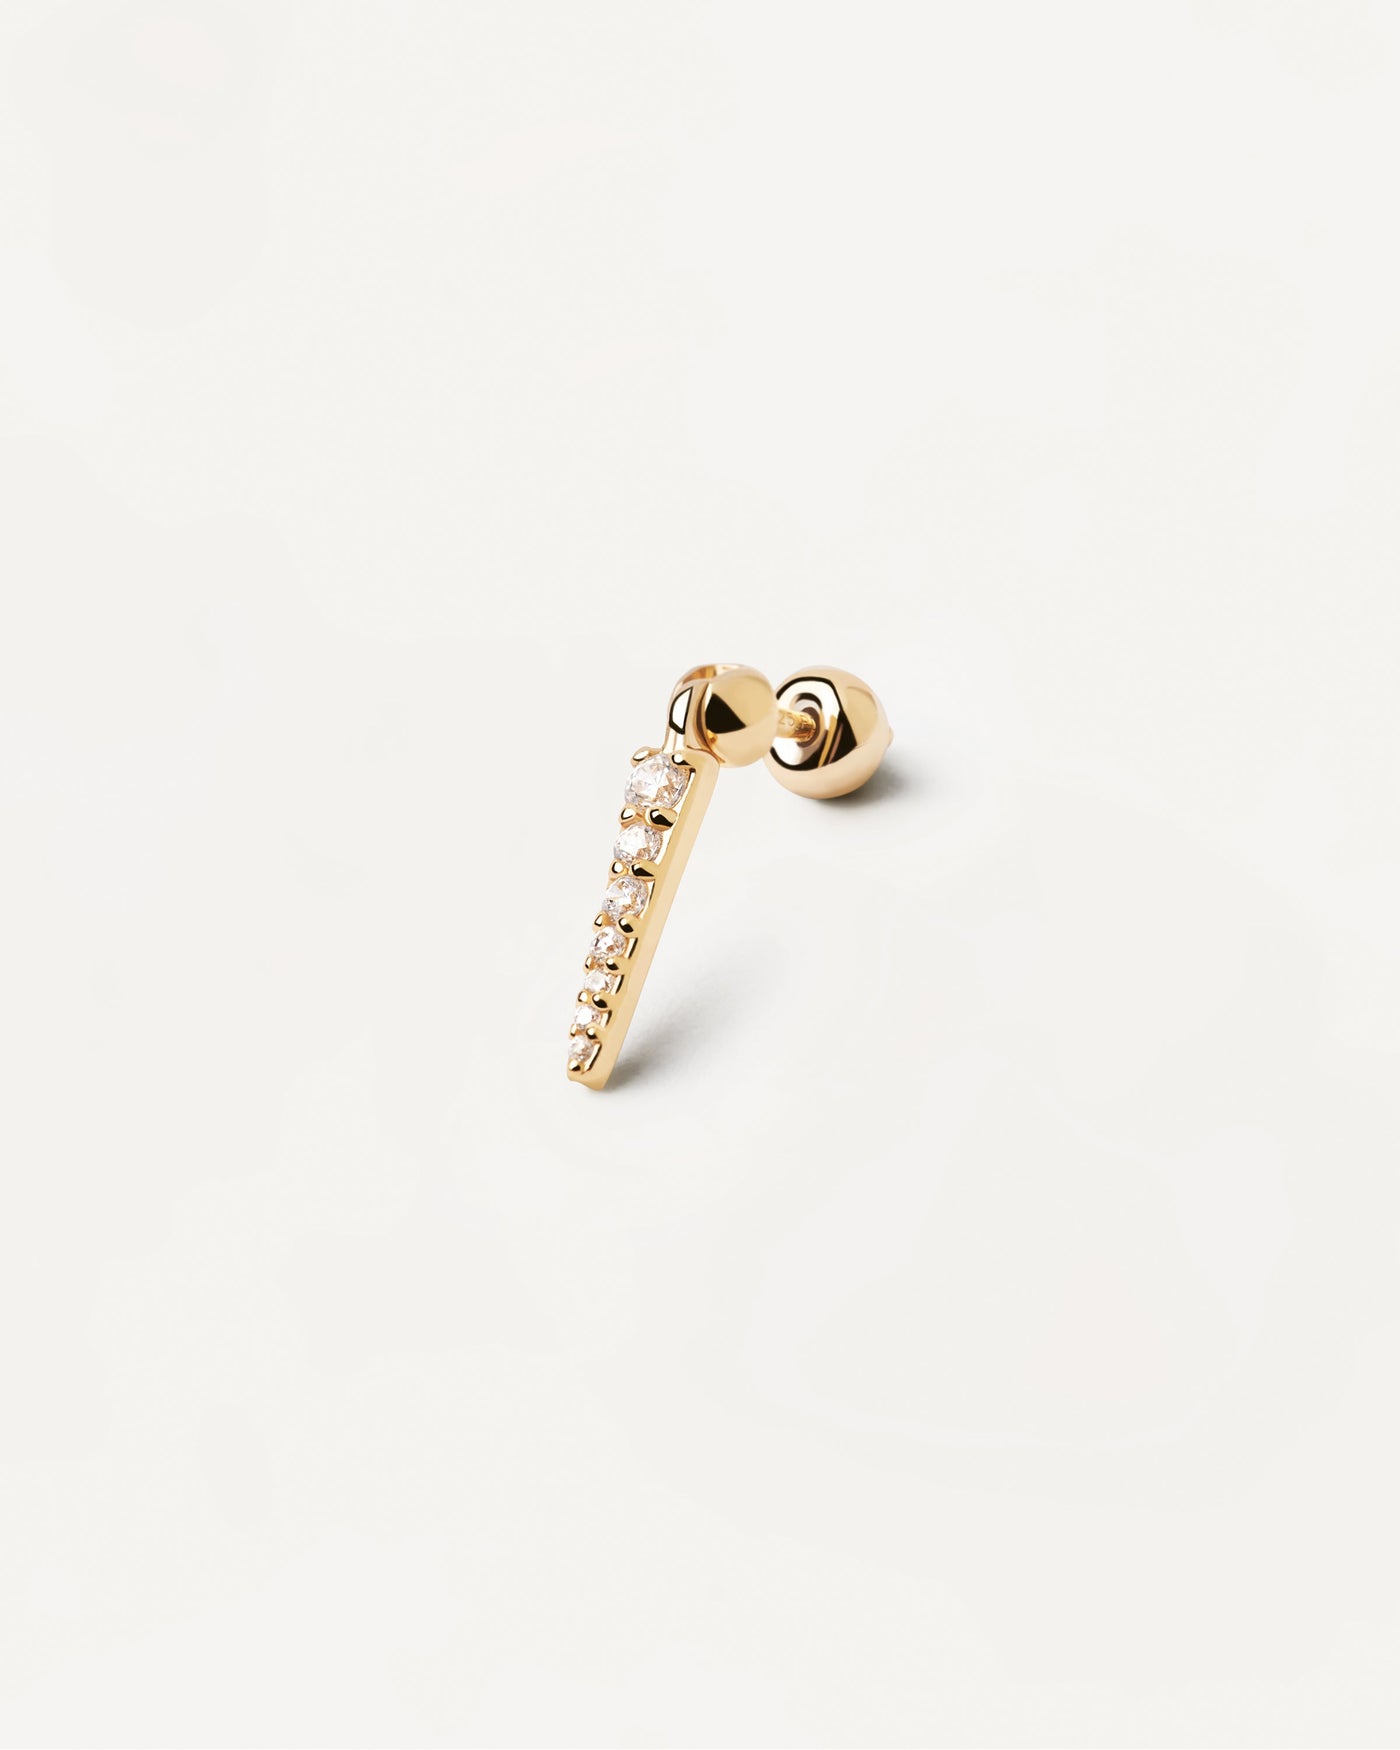 2023 Selection | Vero Single Earring. Gold-plated ear piercing in tip shape with white zirconia. Get the latest arrival from PDPAOLA. Place your order safely and get this Best Seller. Free Shipping.